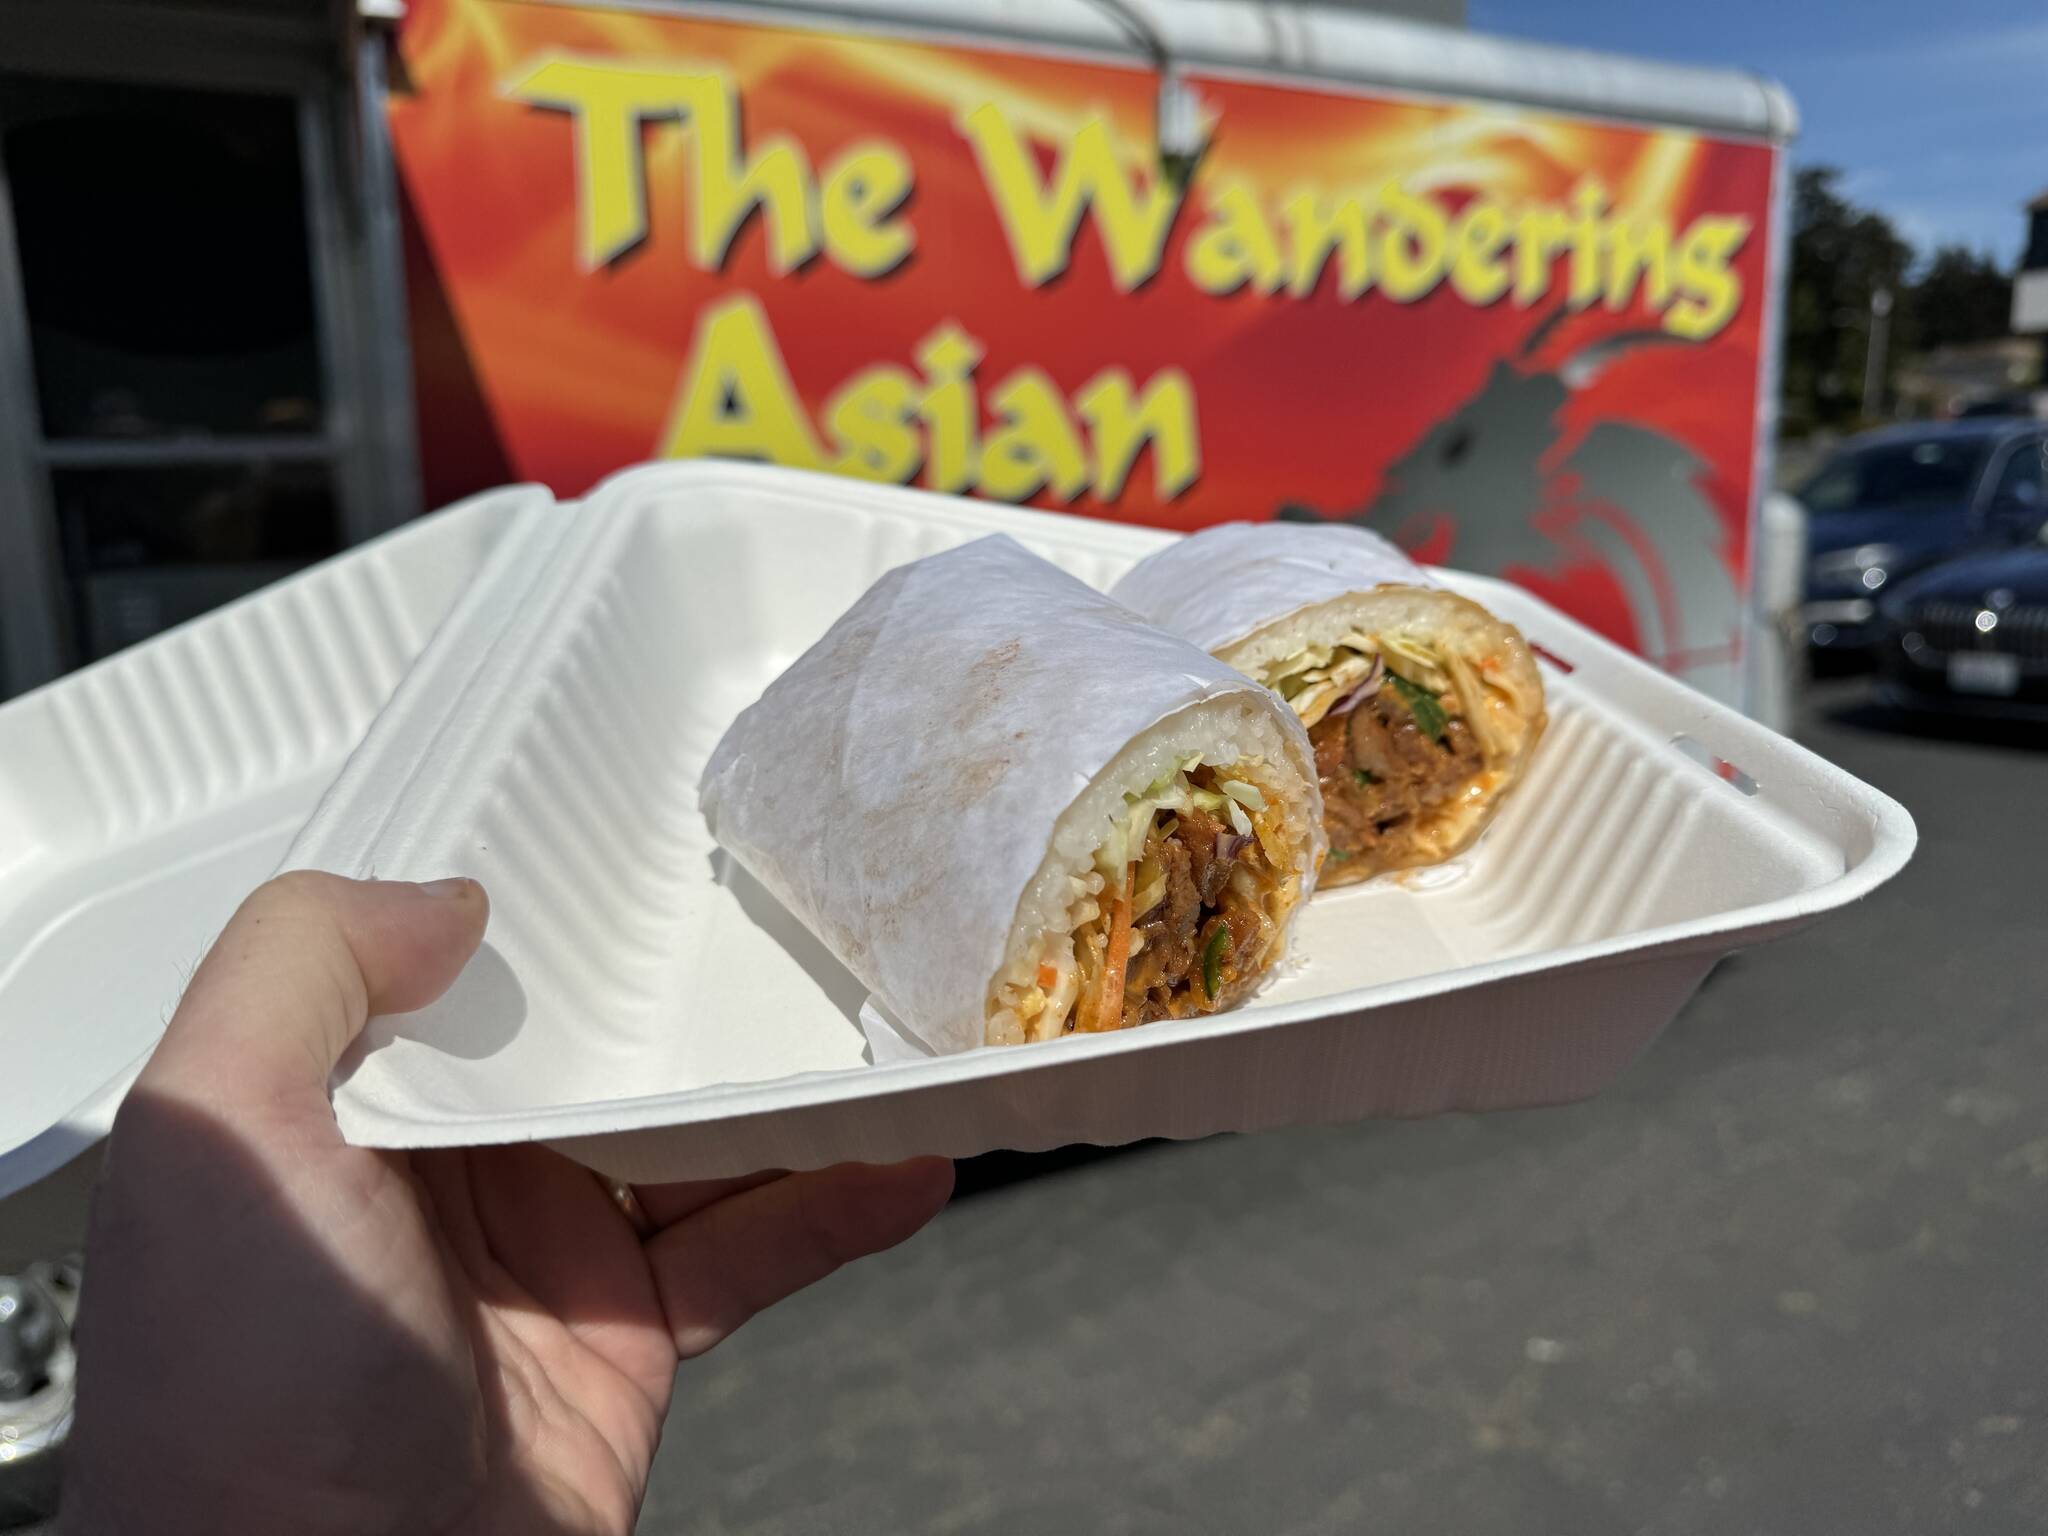 The Wandering Asian marinates their meats in secret family sauces, then wraps them with rice, purple cabbage, carrots, cilantro and more. (Photo provided)